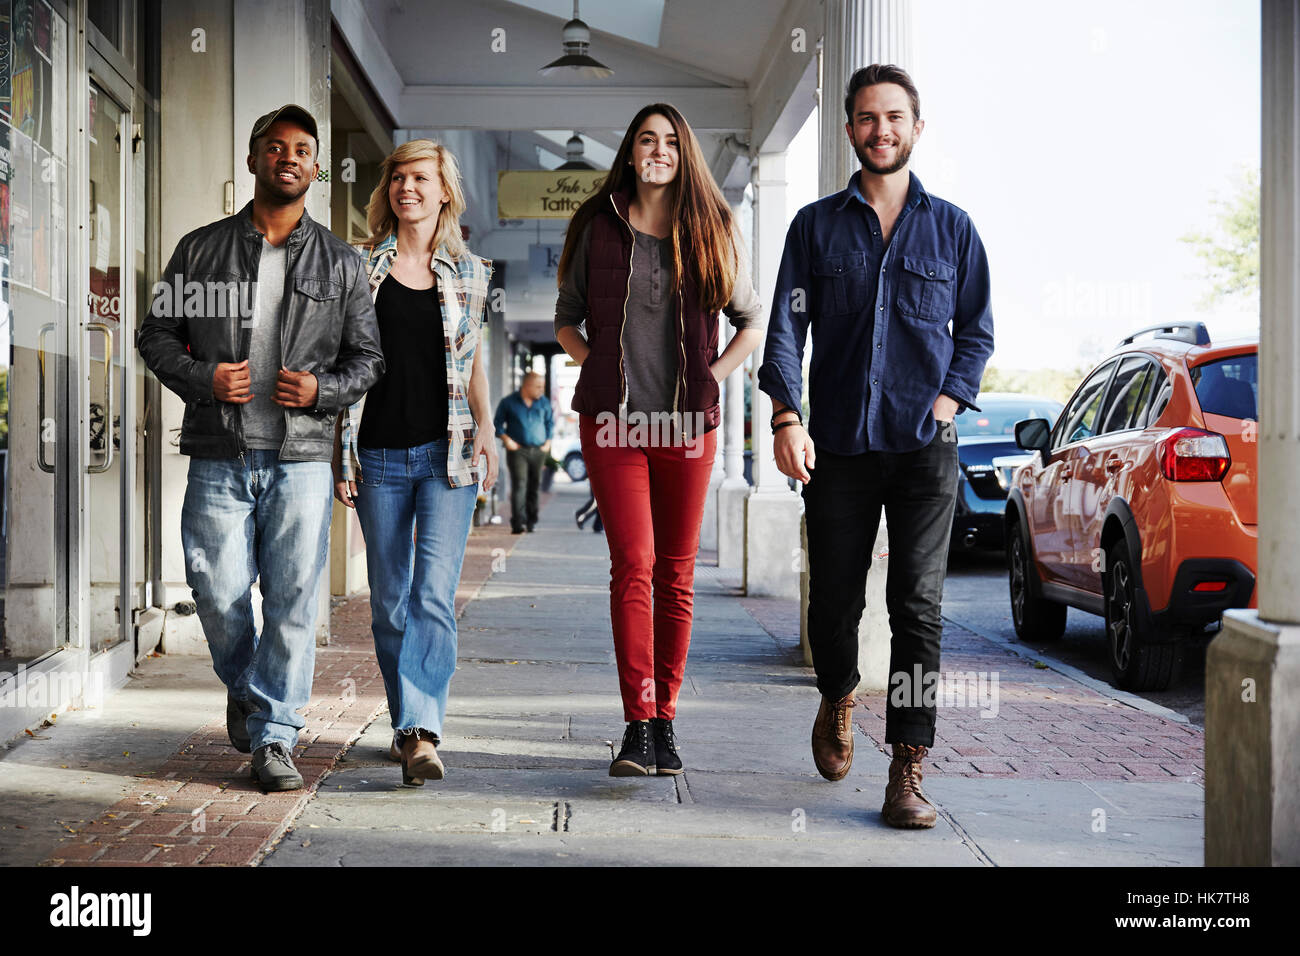 Two young men and two young women walking along a sidewalk, smiling into shot. Stock Photo